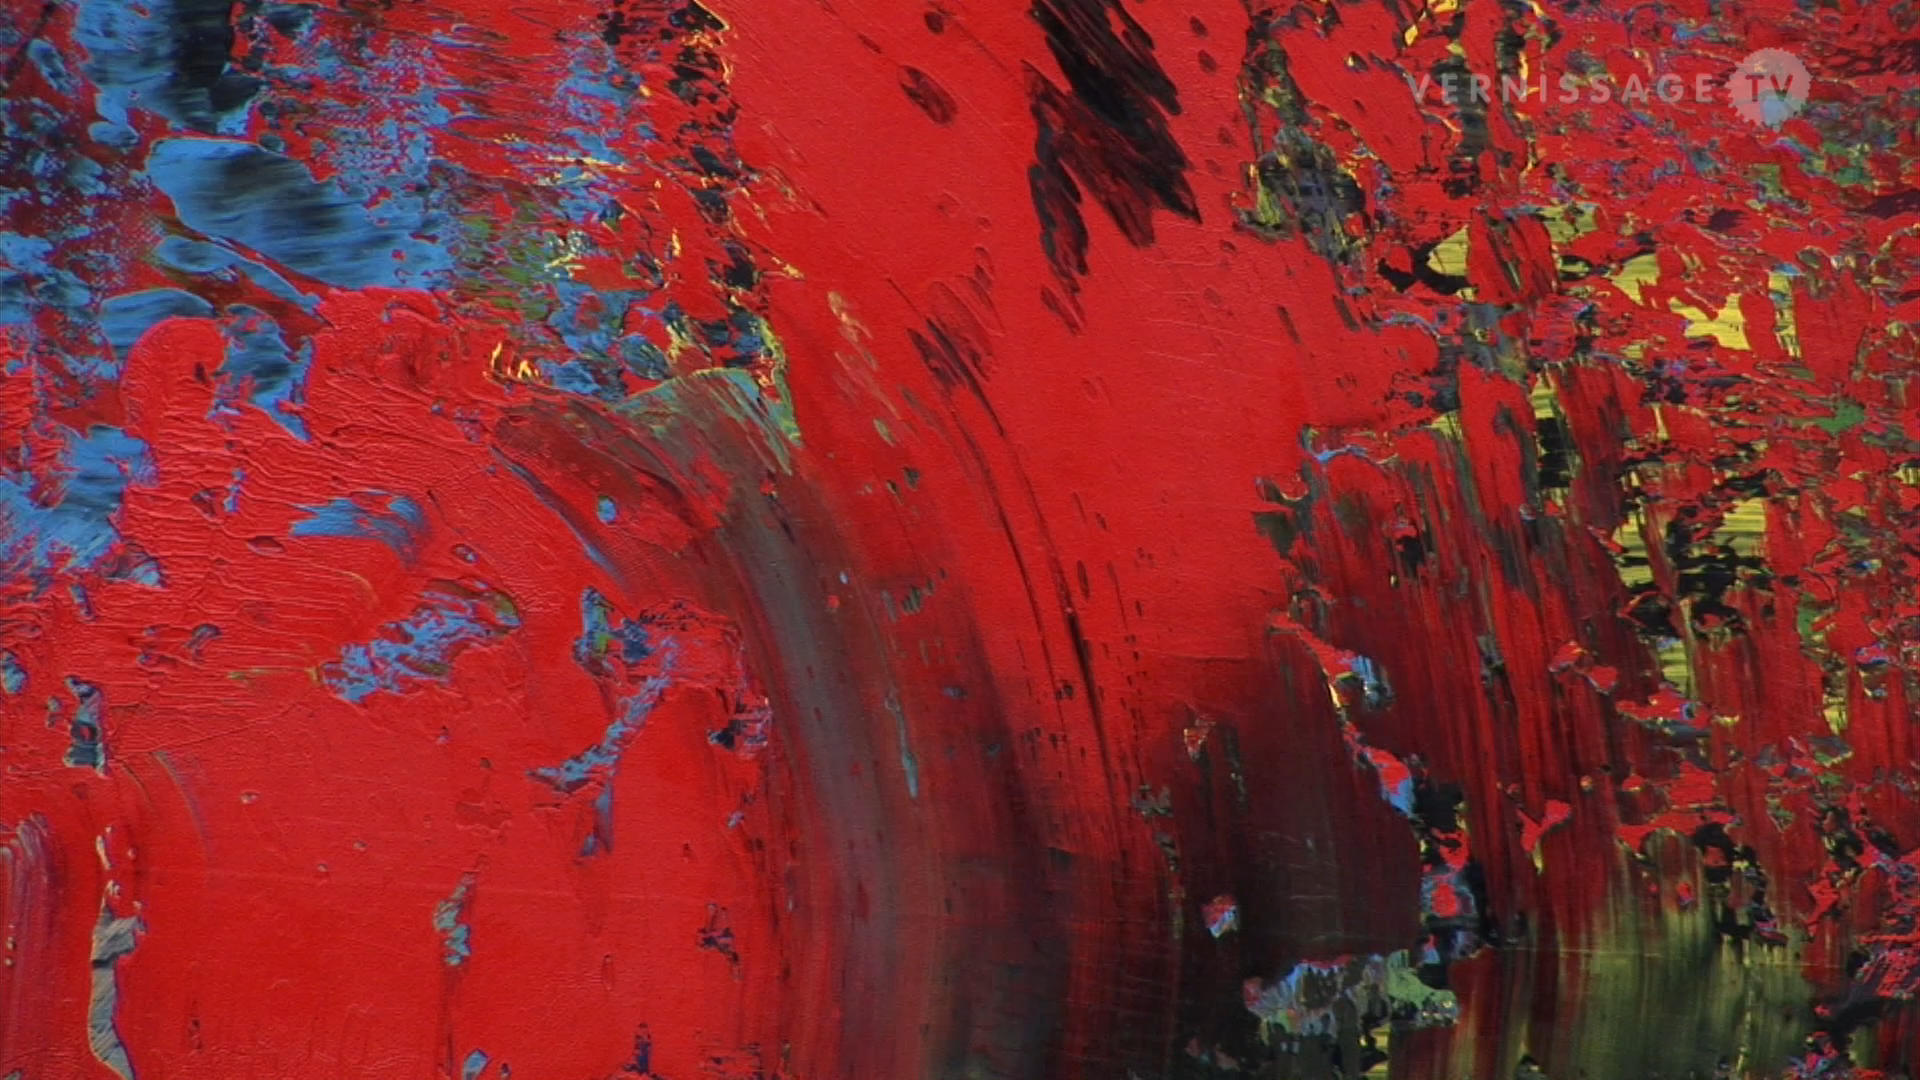 VTV Classics (r3): Gerhard Richter: Paintings from Private Collections (2008)